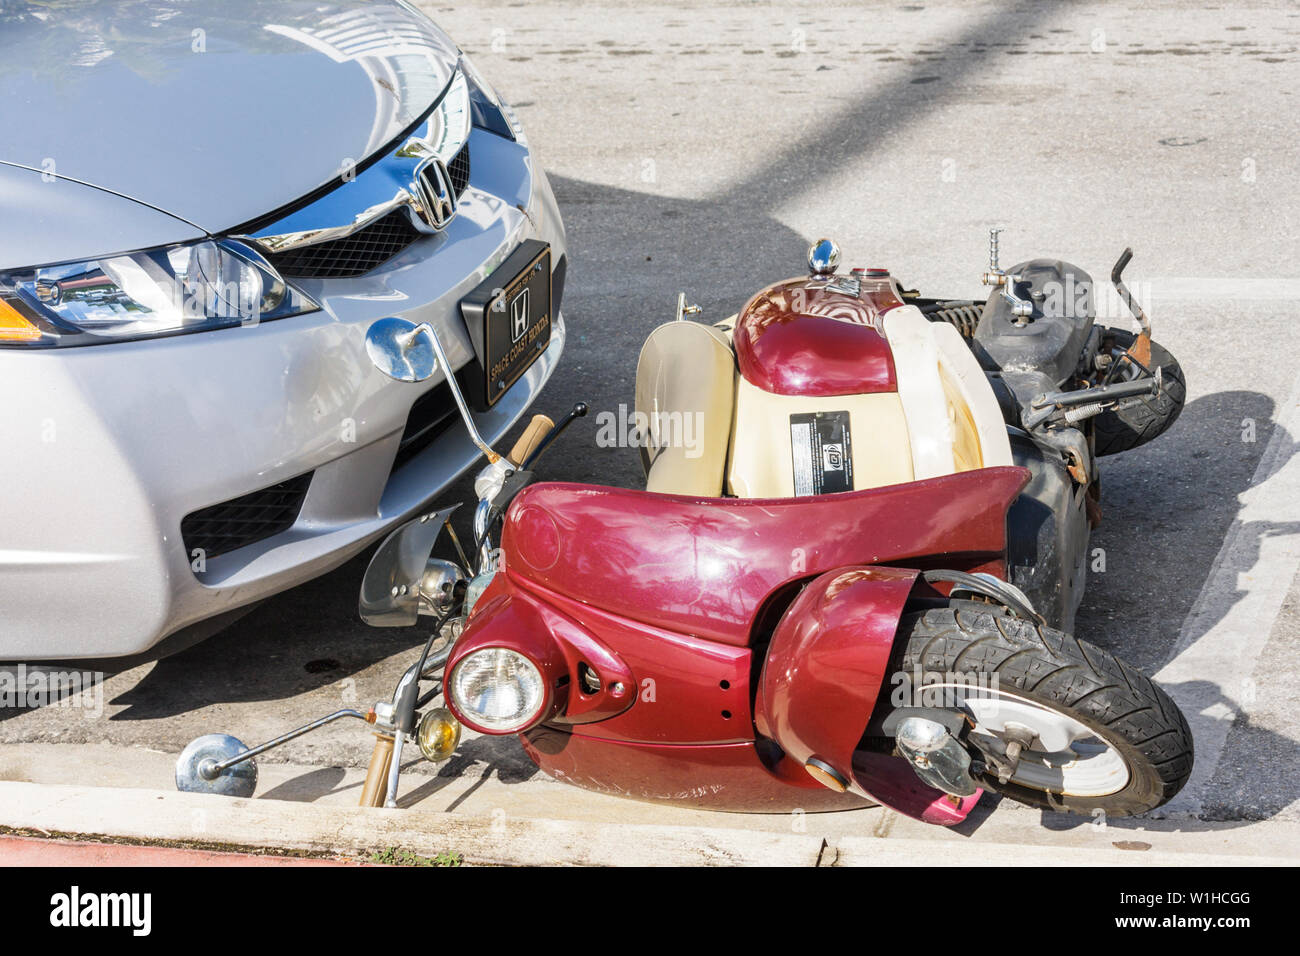 Miami Beach Florida,Ocean Drive,car,scooter,parking,knocked down,fall,damage,accident,FL091008112 Stock Photo